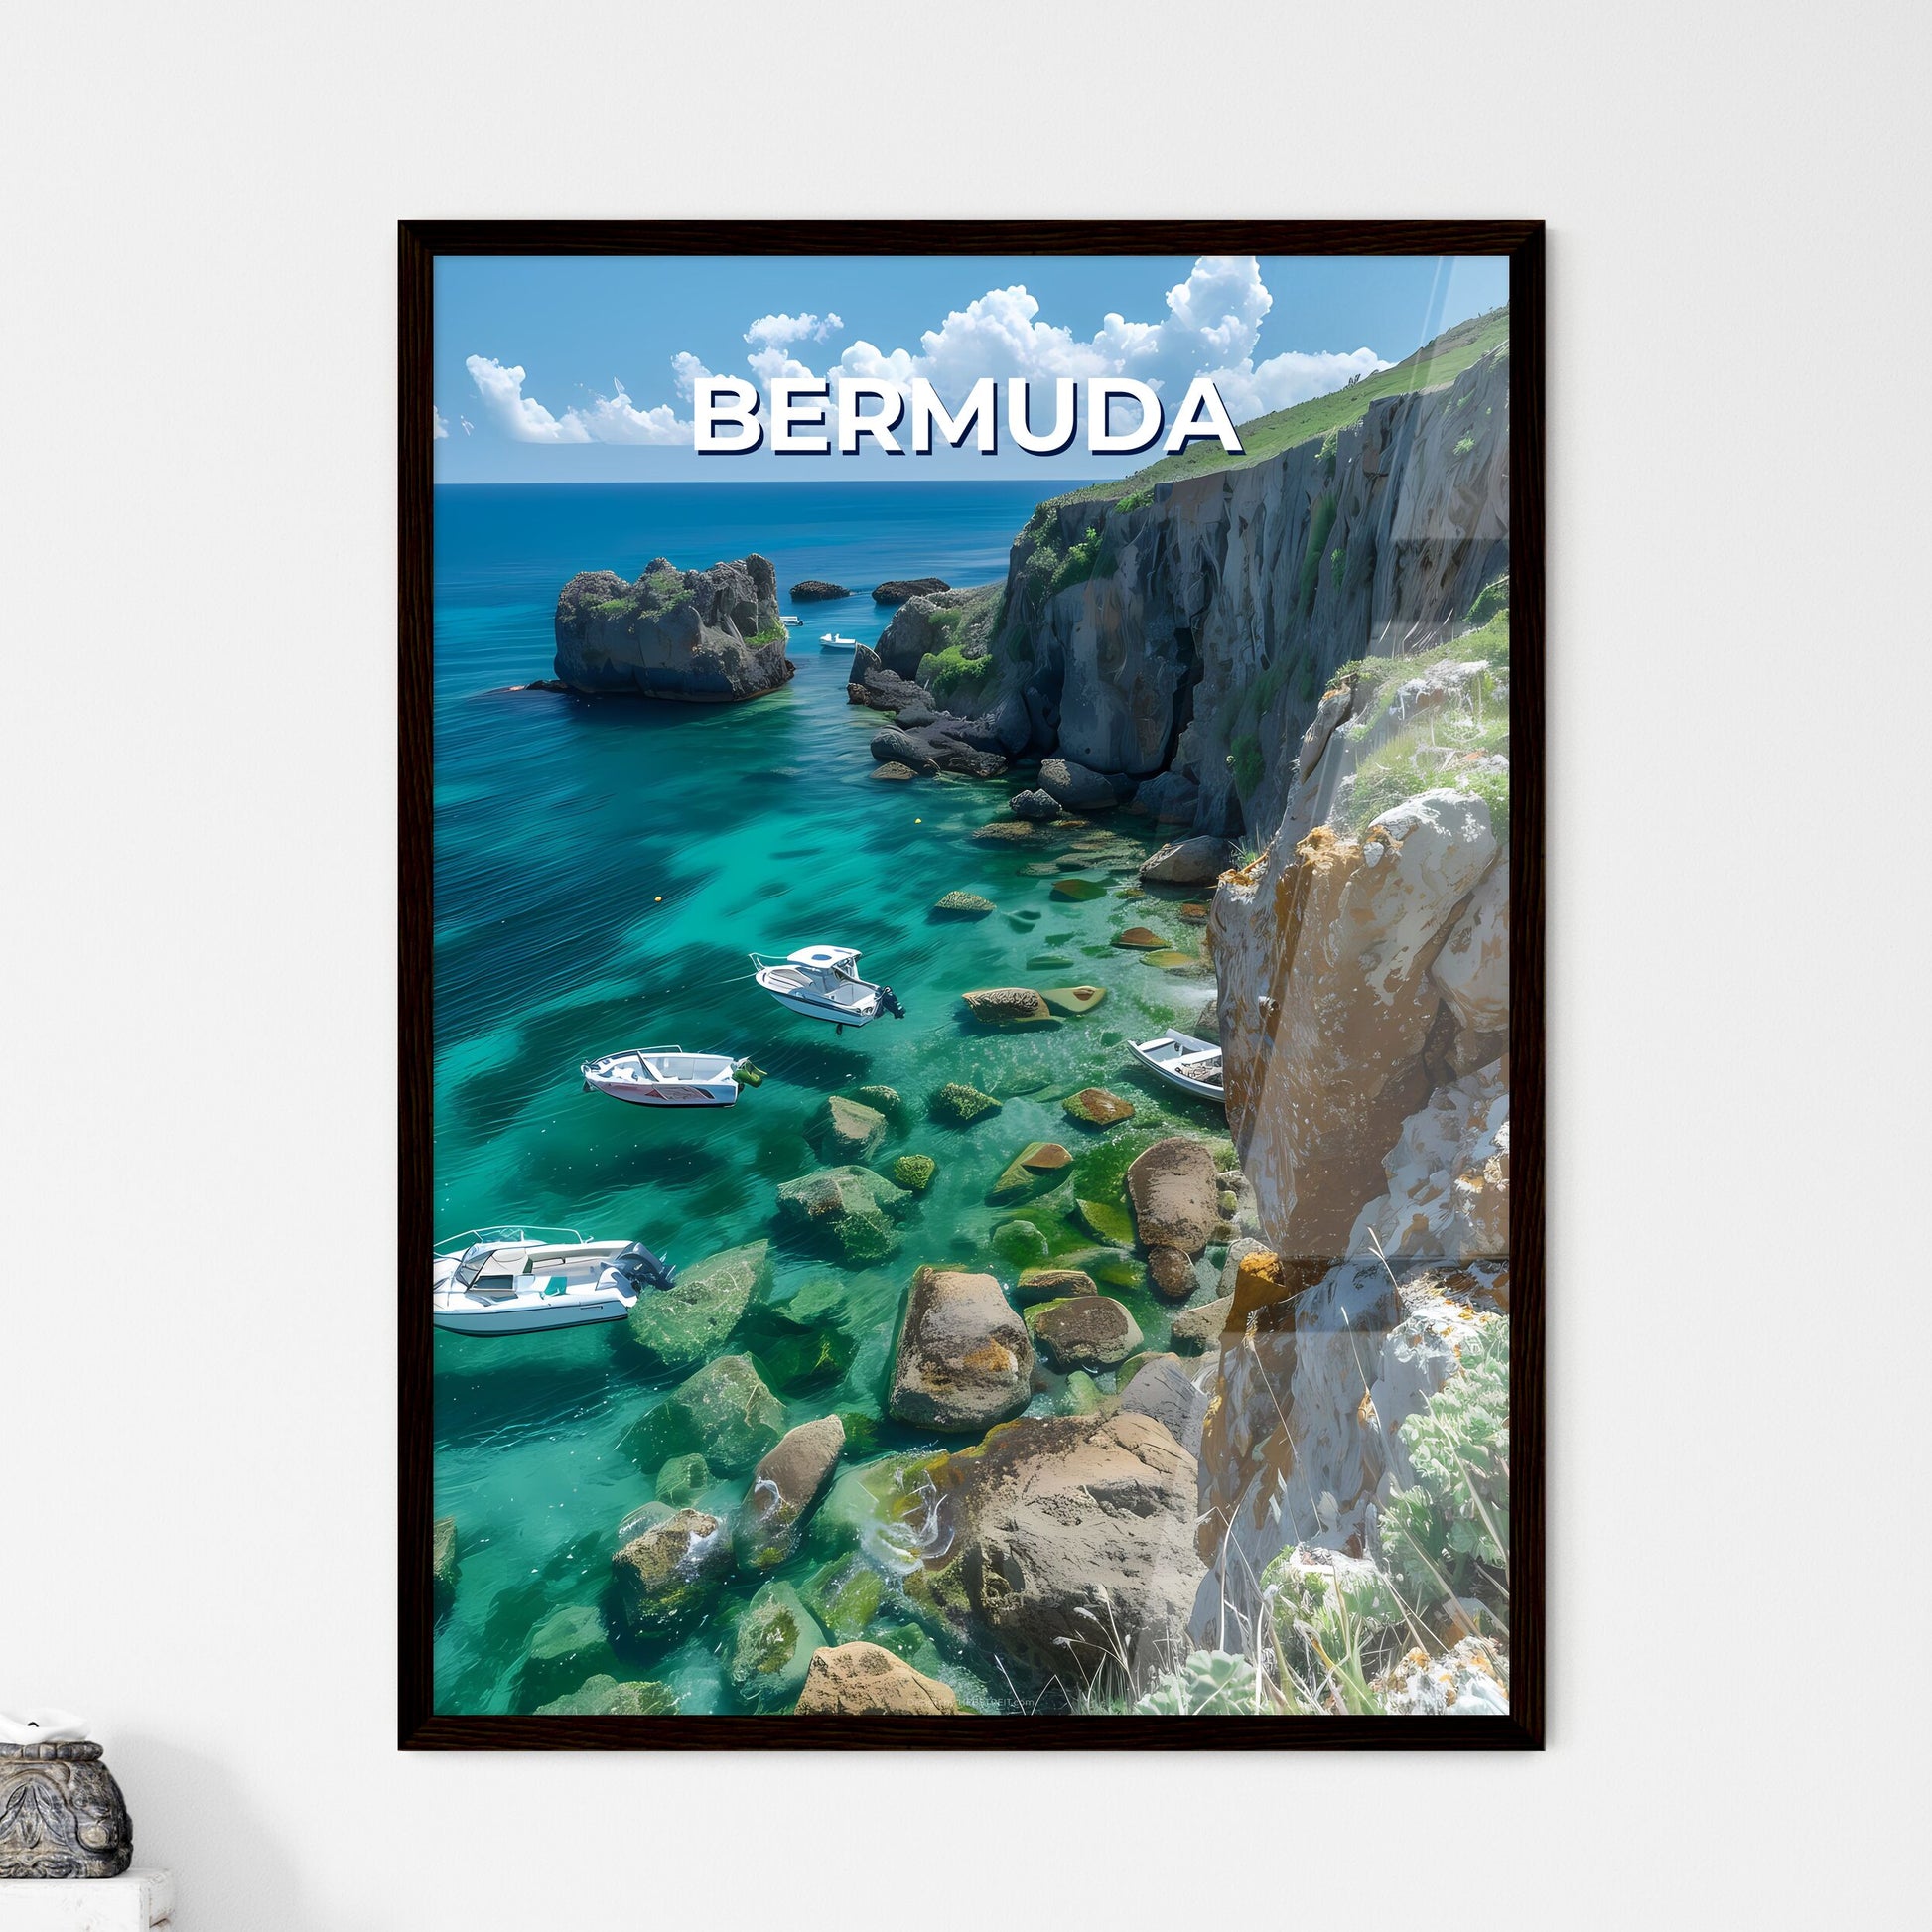 Artful Bermuda: Vivid Painting of Boats in Serenity, Backdropped by Rocky Coast and Towering Cliff